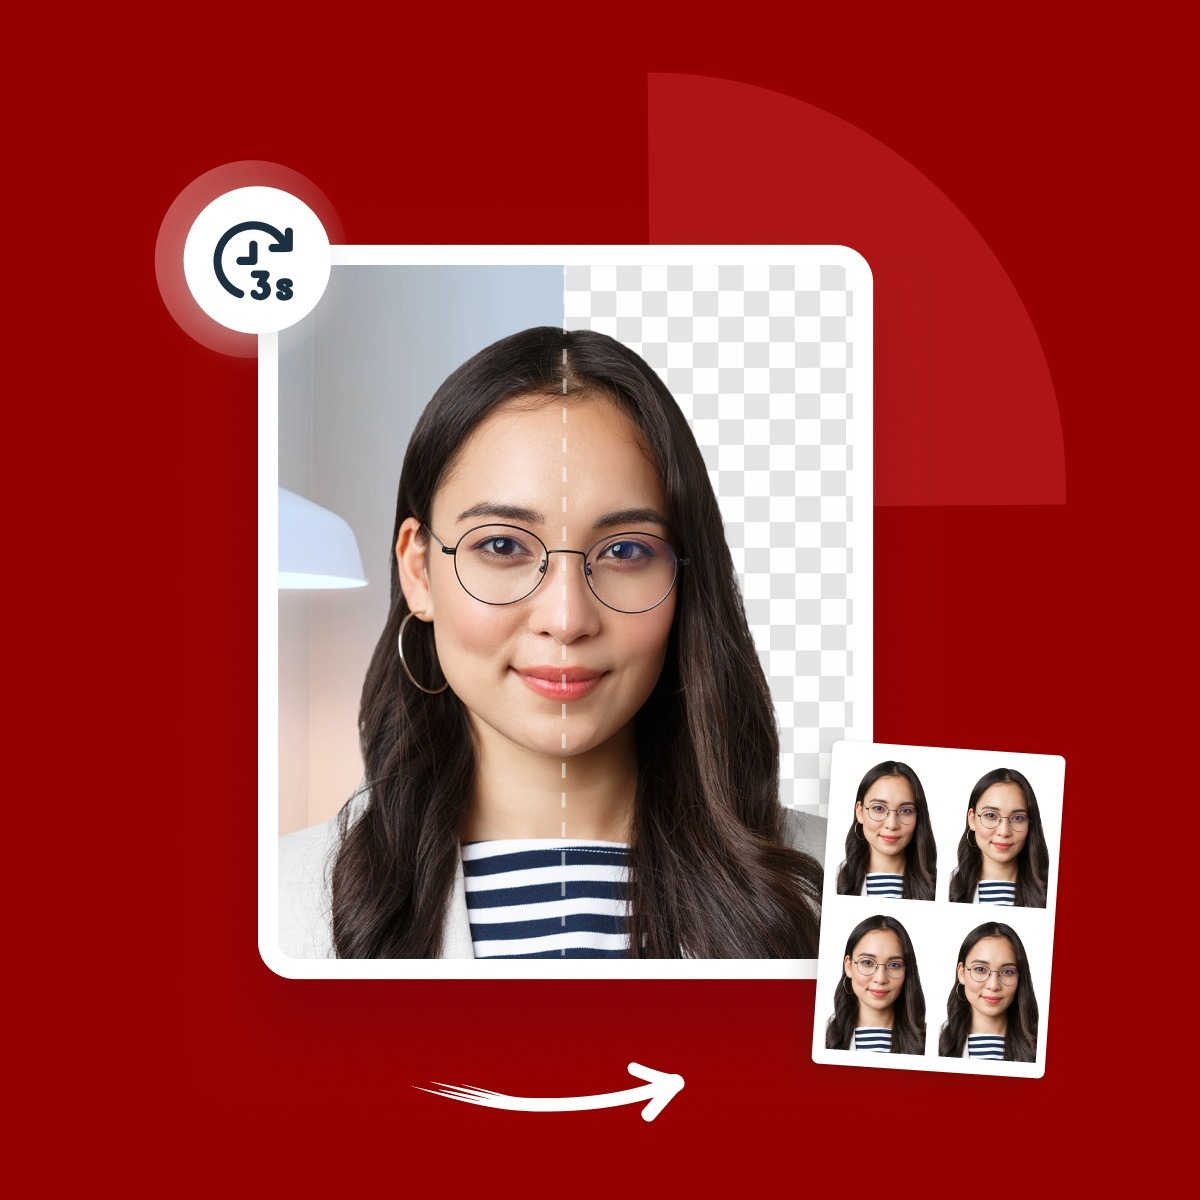 An image showing how Passport Photo Online changes regular pictures to passport photos.